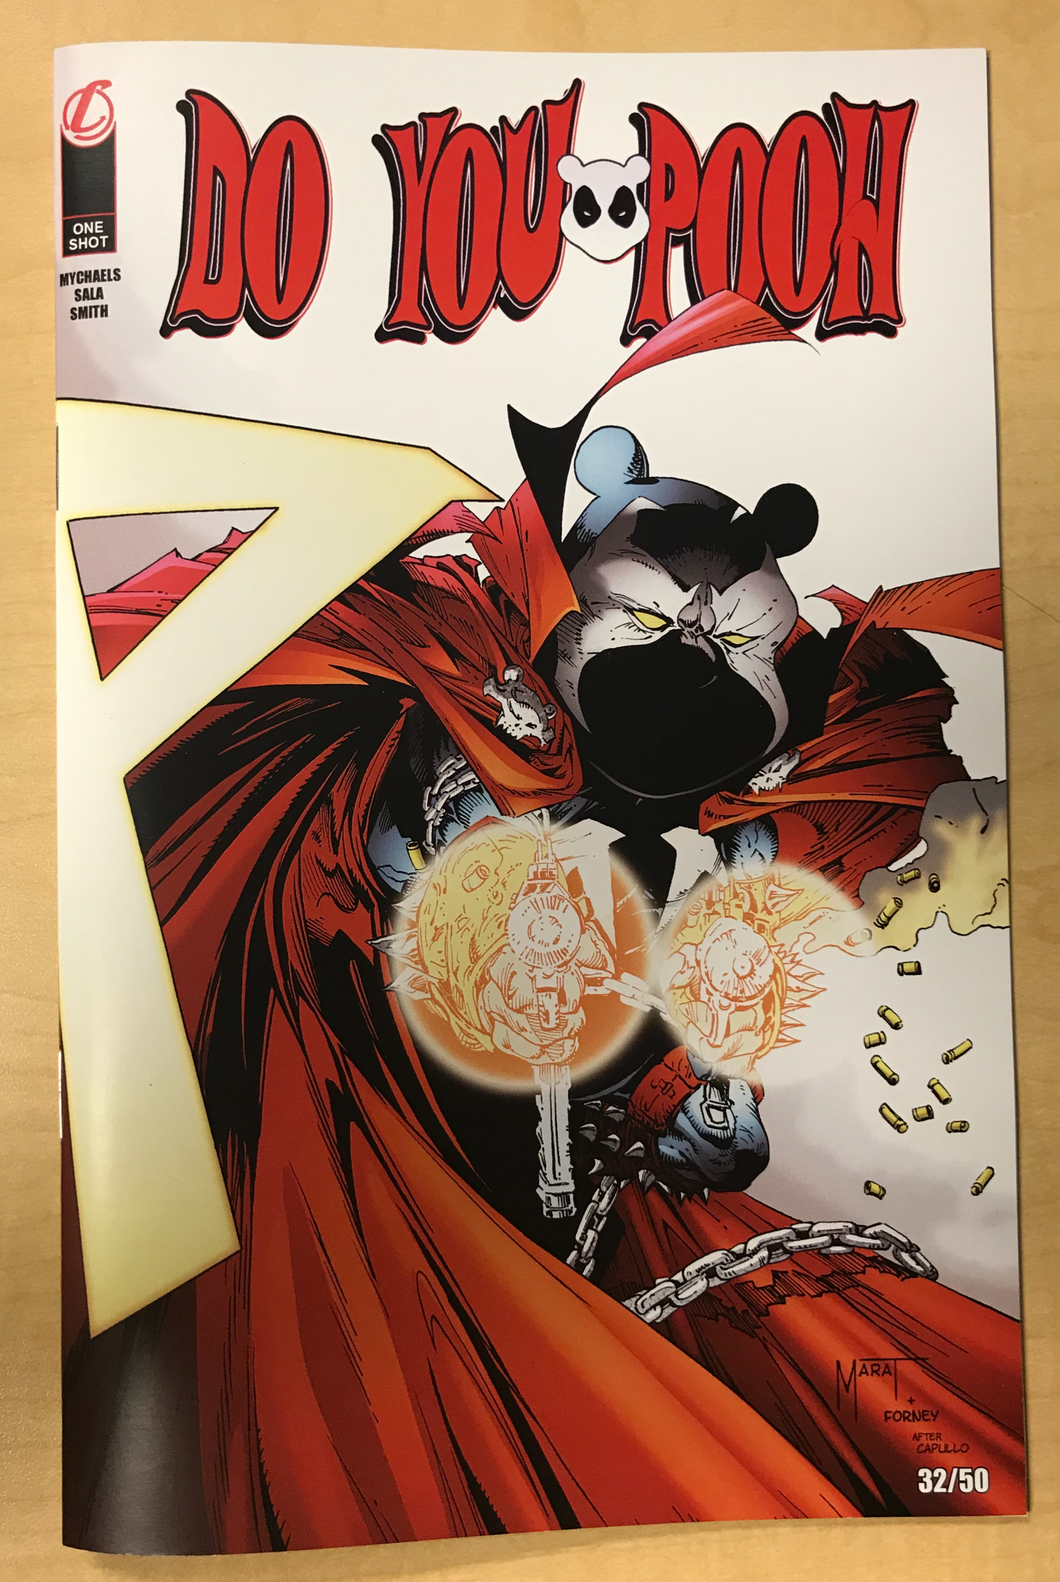 Do You Pooh? #1 Spawn #300 Greg Capullo Homage Variant Cover by Marat Mychaels 50 Copies Made!!!